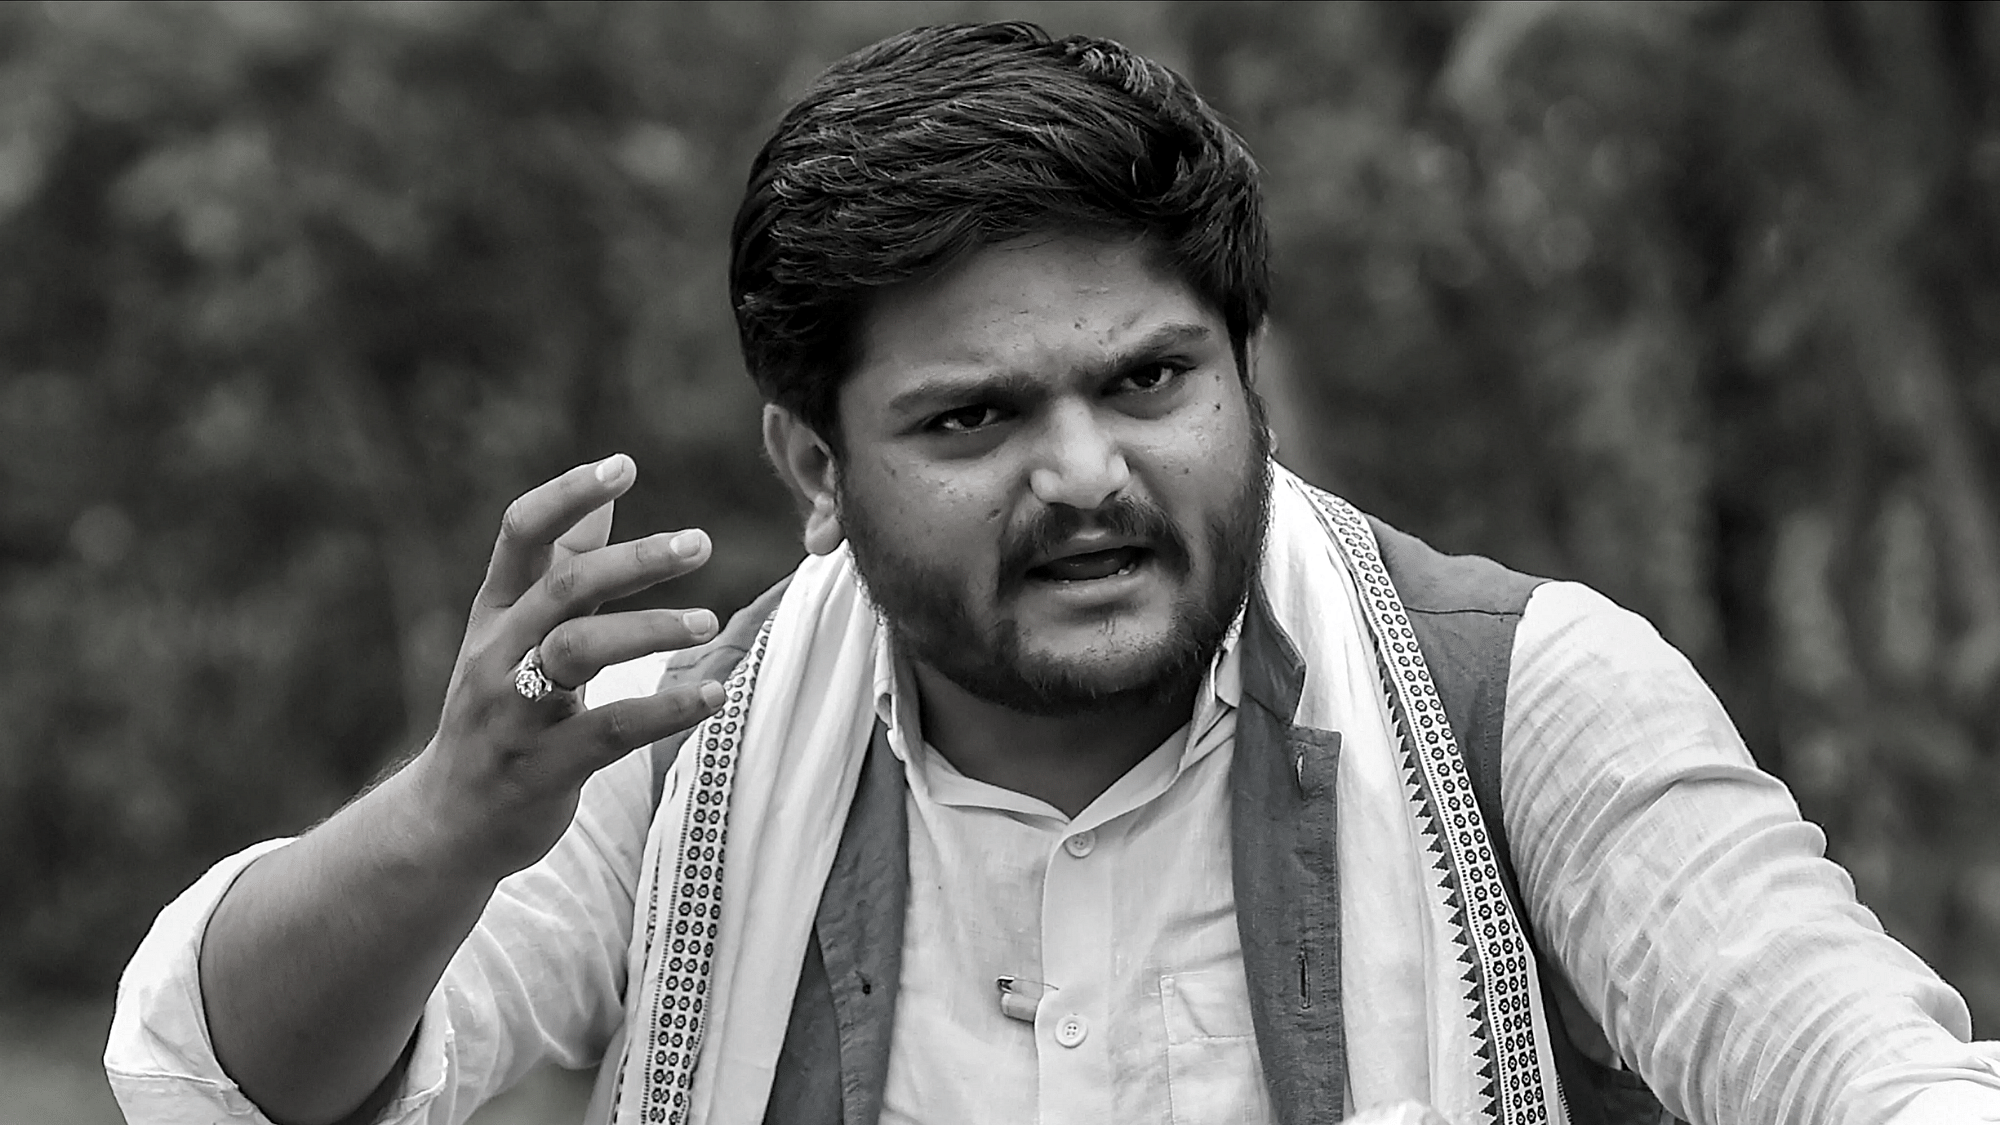 Gujarat Congress leader Hardik Patel is untraceable since January 18 when he was arrested in a 2015 sedition case, his wife Kinjal said on 10 February.